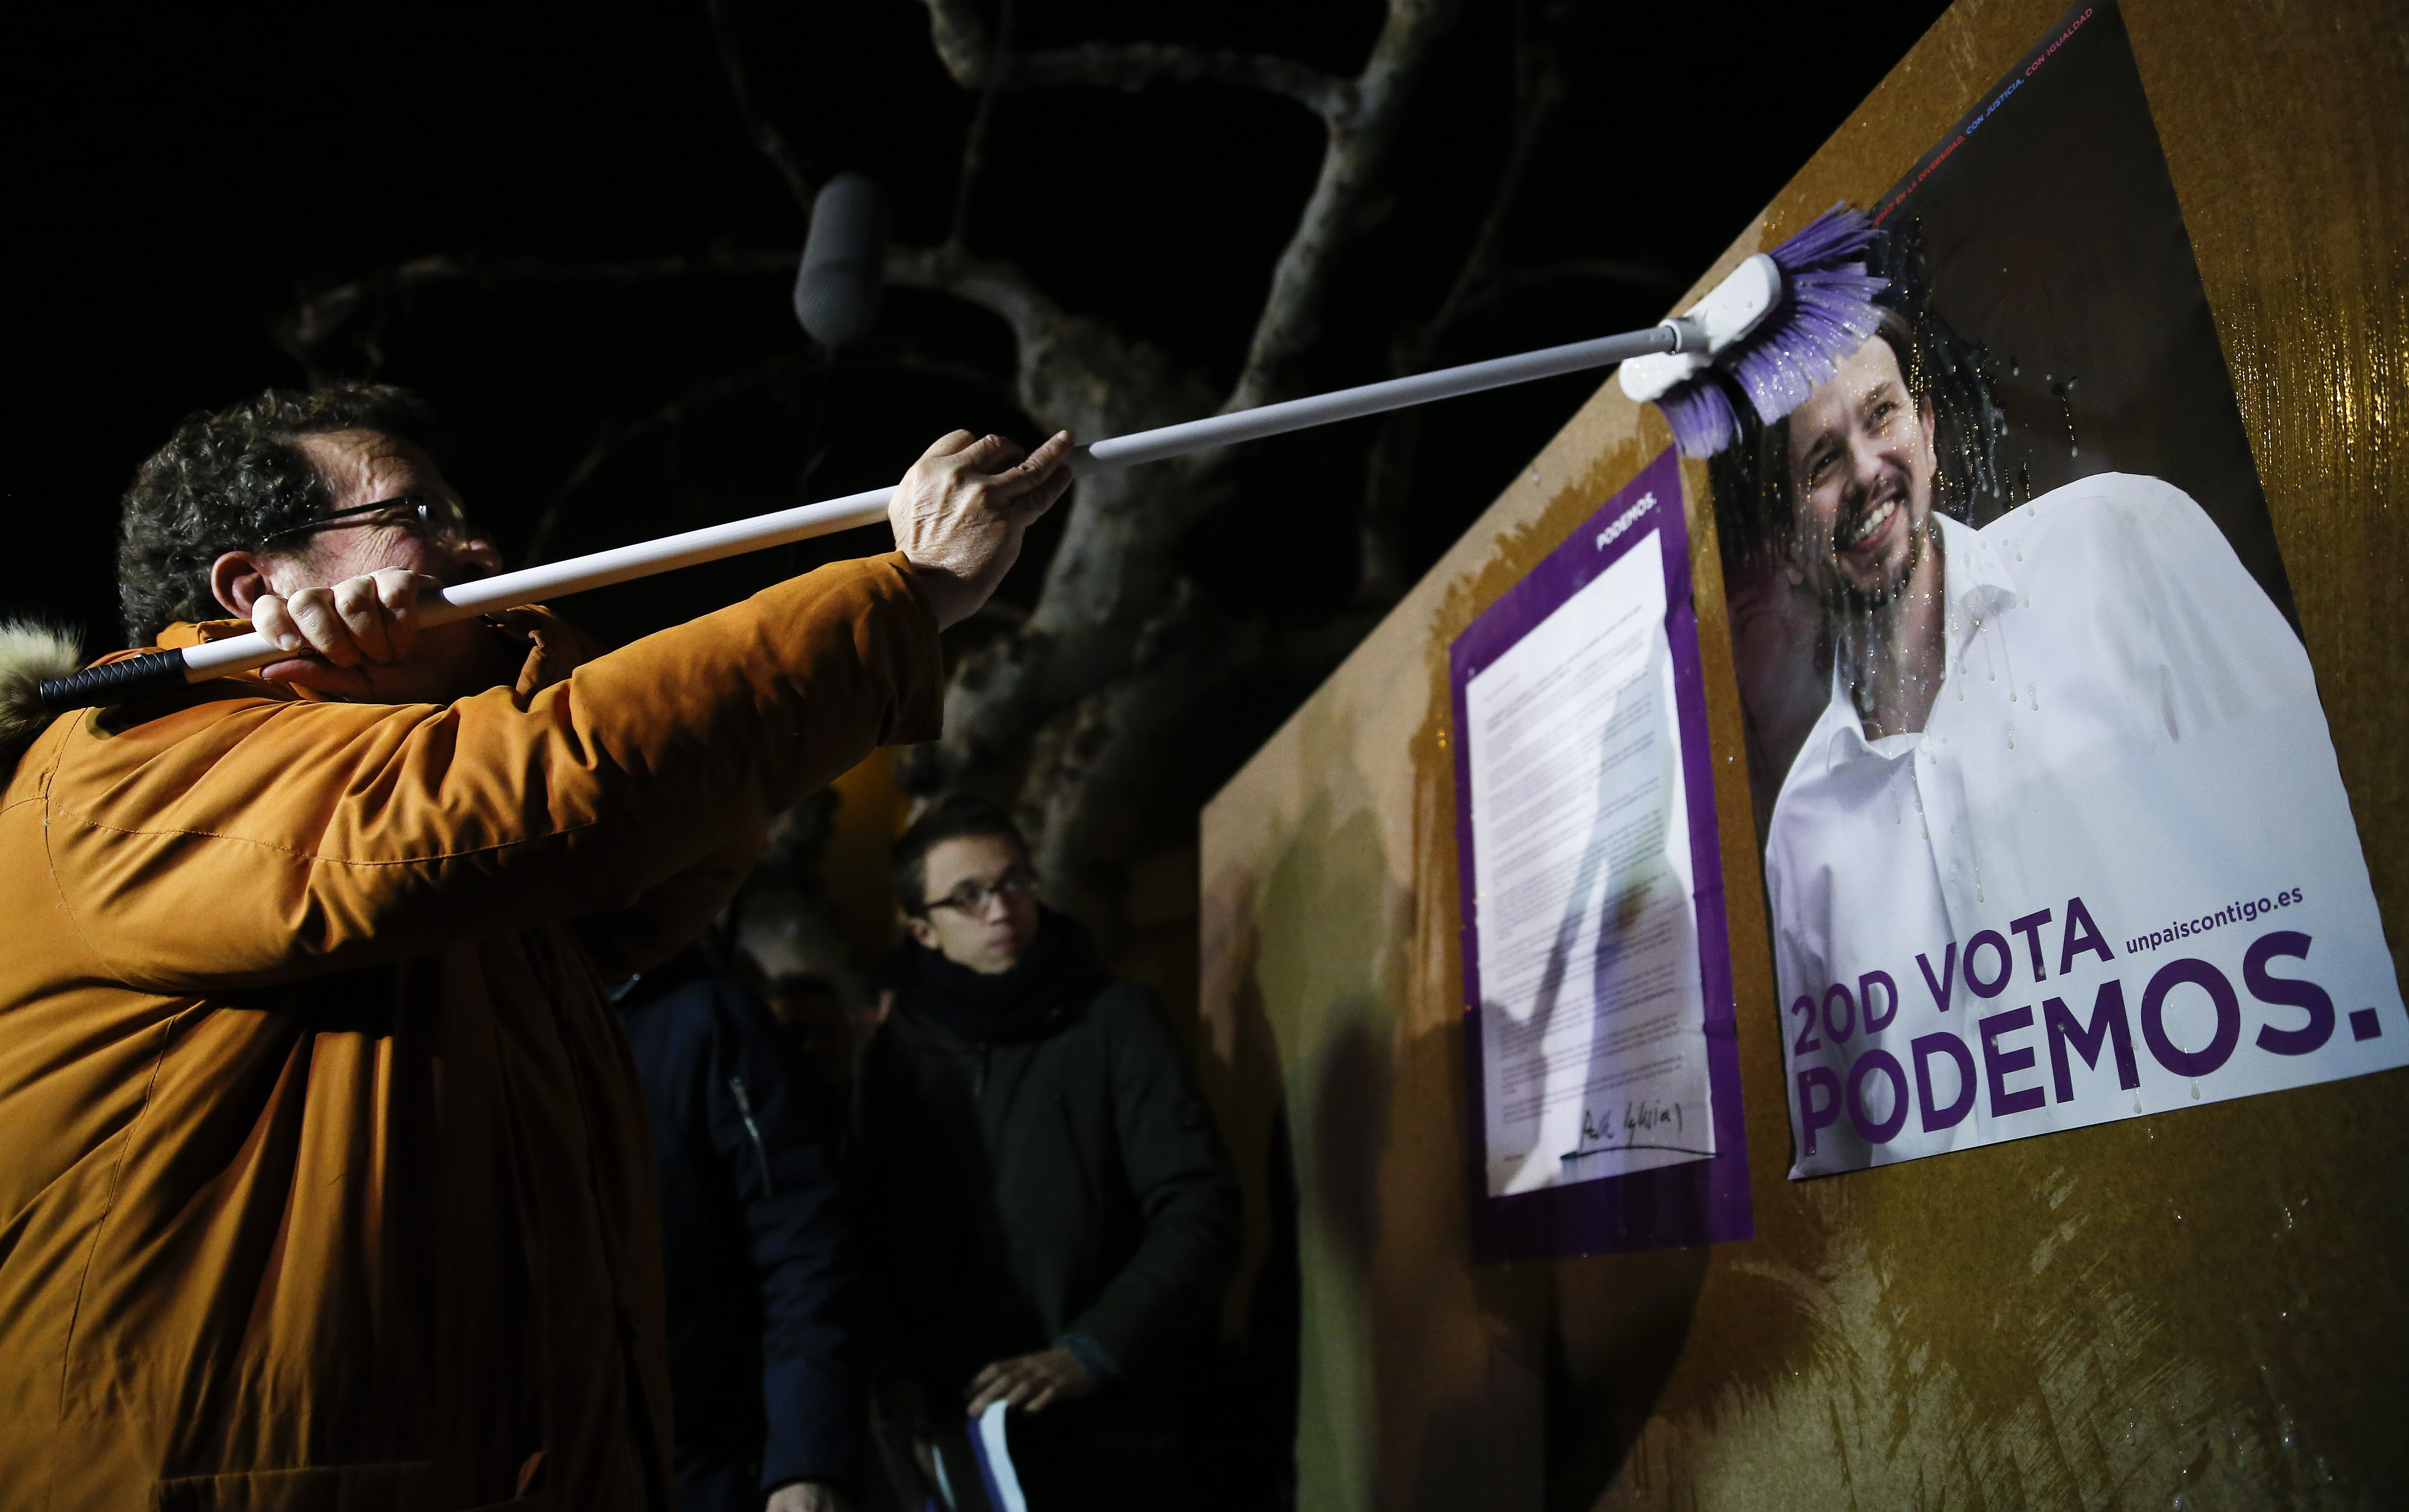 Javier Iglesias, father of Podemos (We Can) party leader Pablo Iglesias, puts up a poster of his son at the start of campaigning for Spain's general election in the village of Villaralbo, Spain, December 3, 2015.  REUTERS/Juan Medina - RTX1X3CU